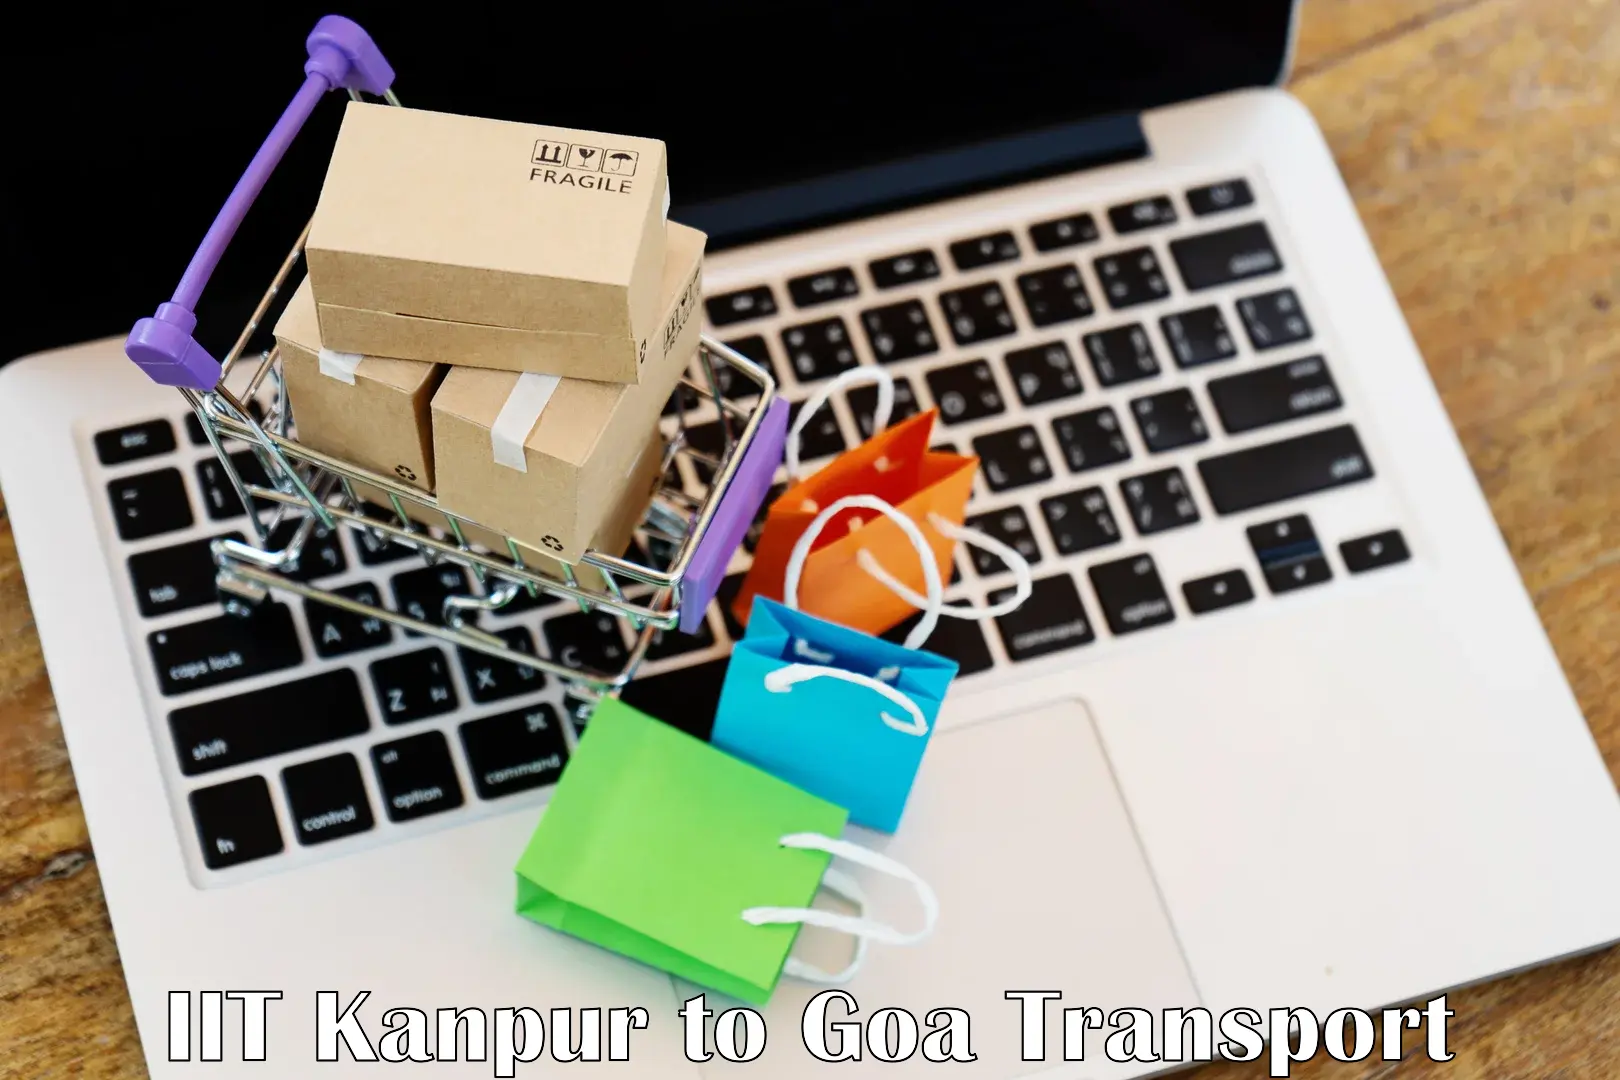 Commercial transport service IIT Kanpur to Goa